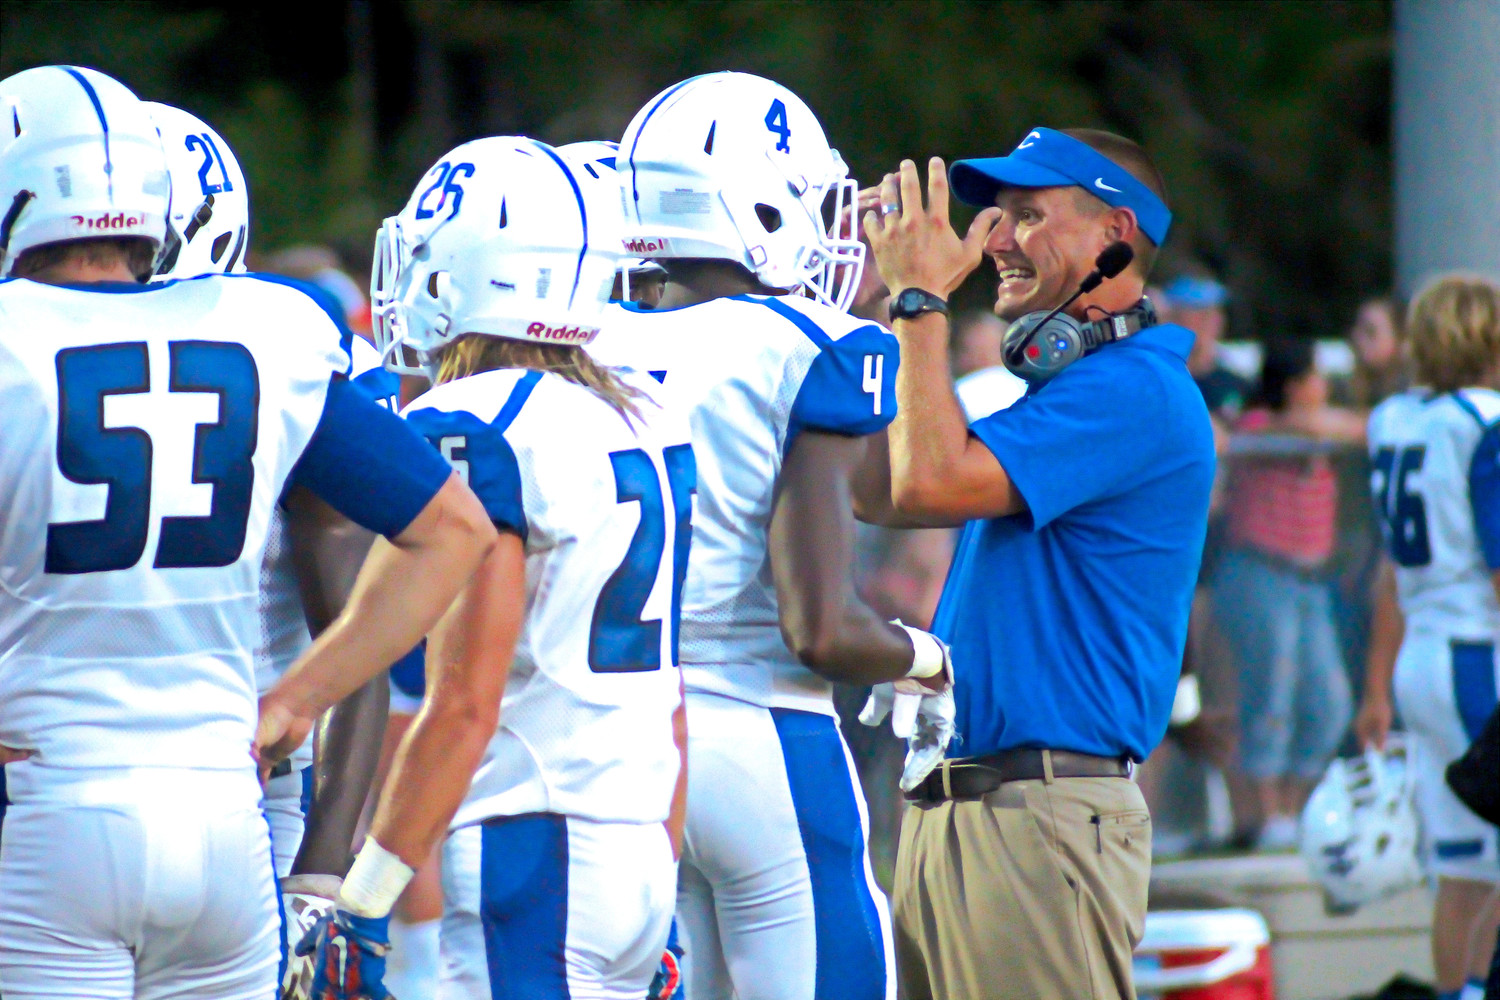 Clay High coach Joshua Hoekstra was frustrated throughout the game with a series of dropped passes and fumbles that stalled Blue Devil scoring efforts.